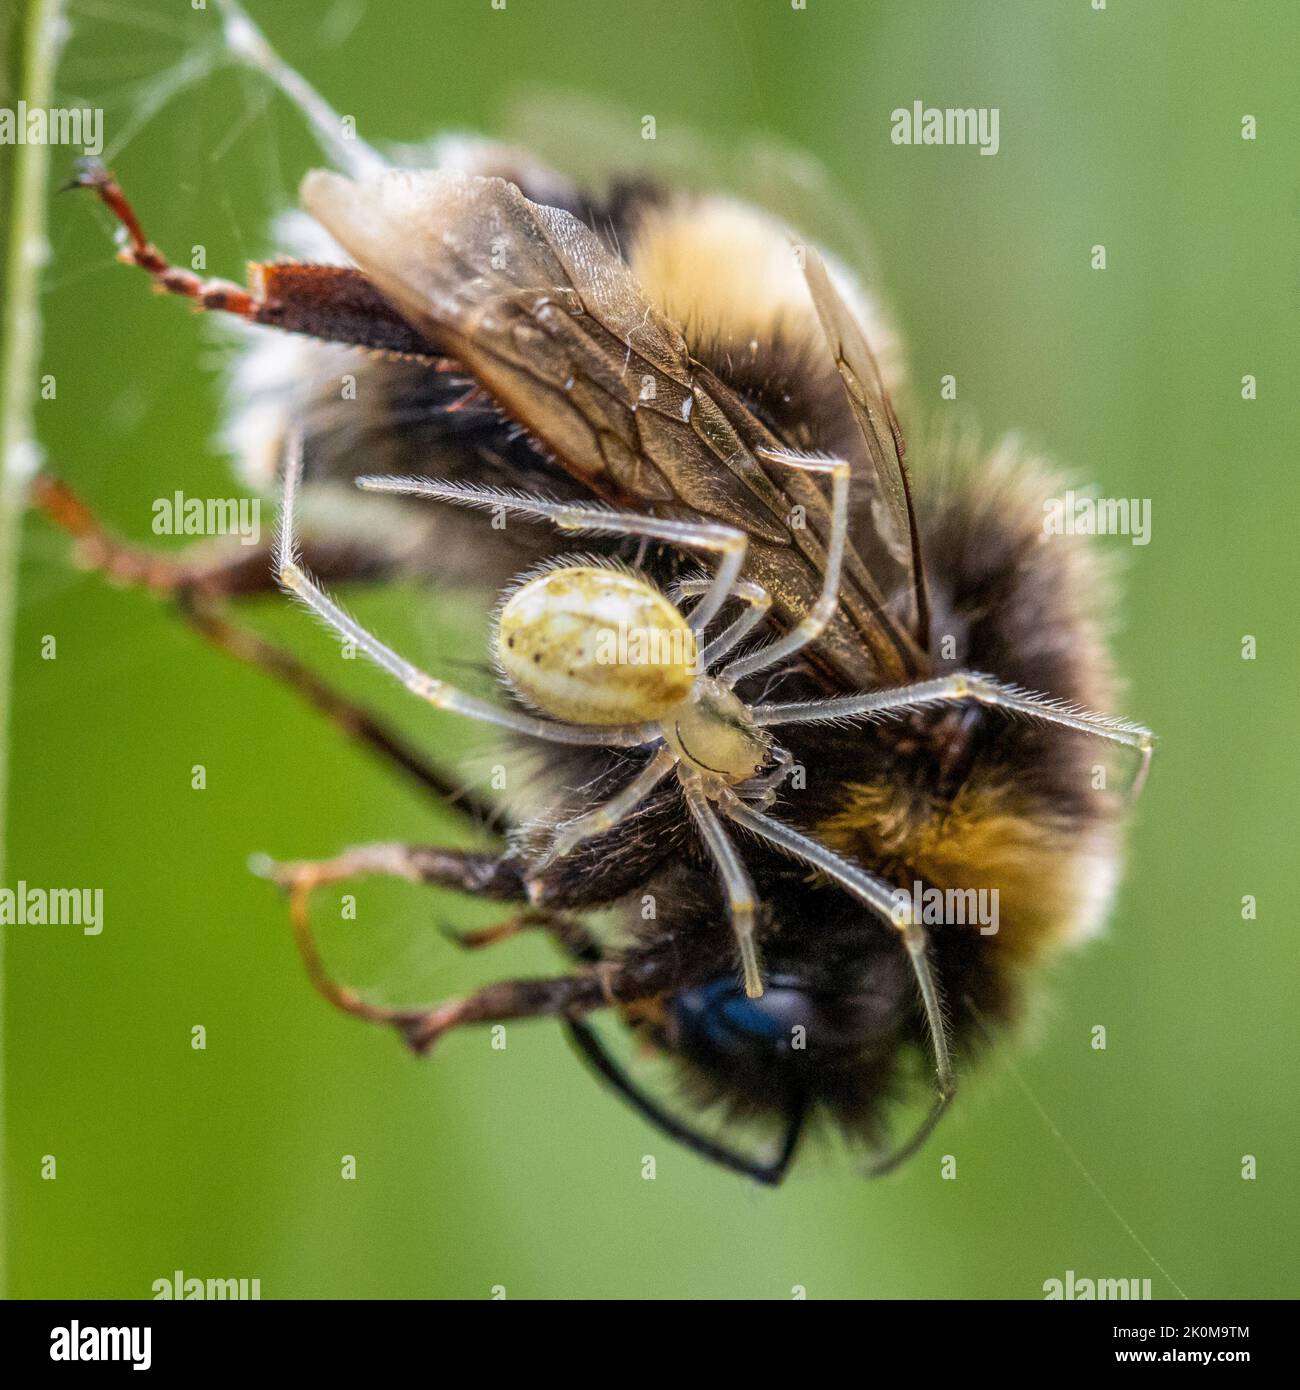 Comb-footed spider (Enoplognatha) feeding on a dead bumblebee trapped in its web, Yorkshire, England, UK wildlife Stock Photo